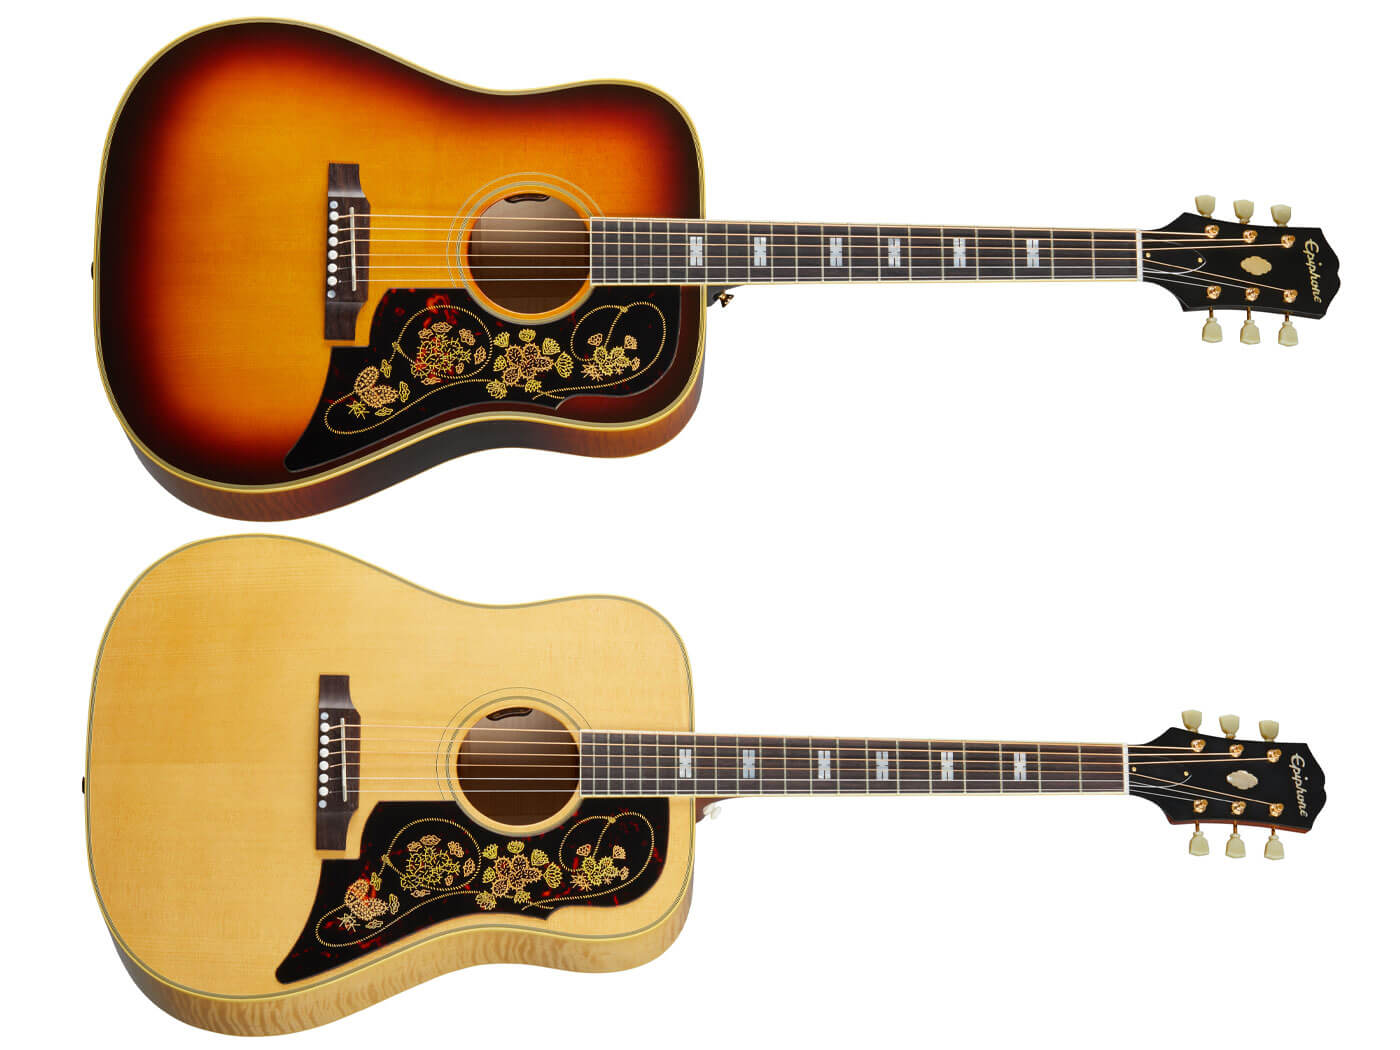 Epiphone's made-in-USA Frontier